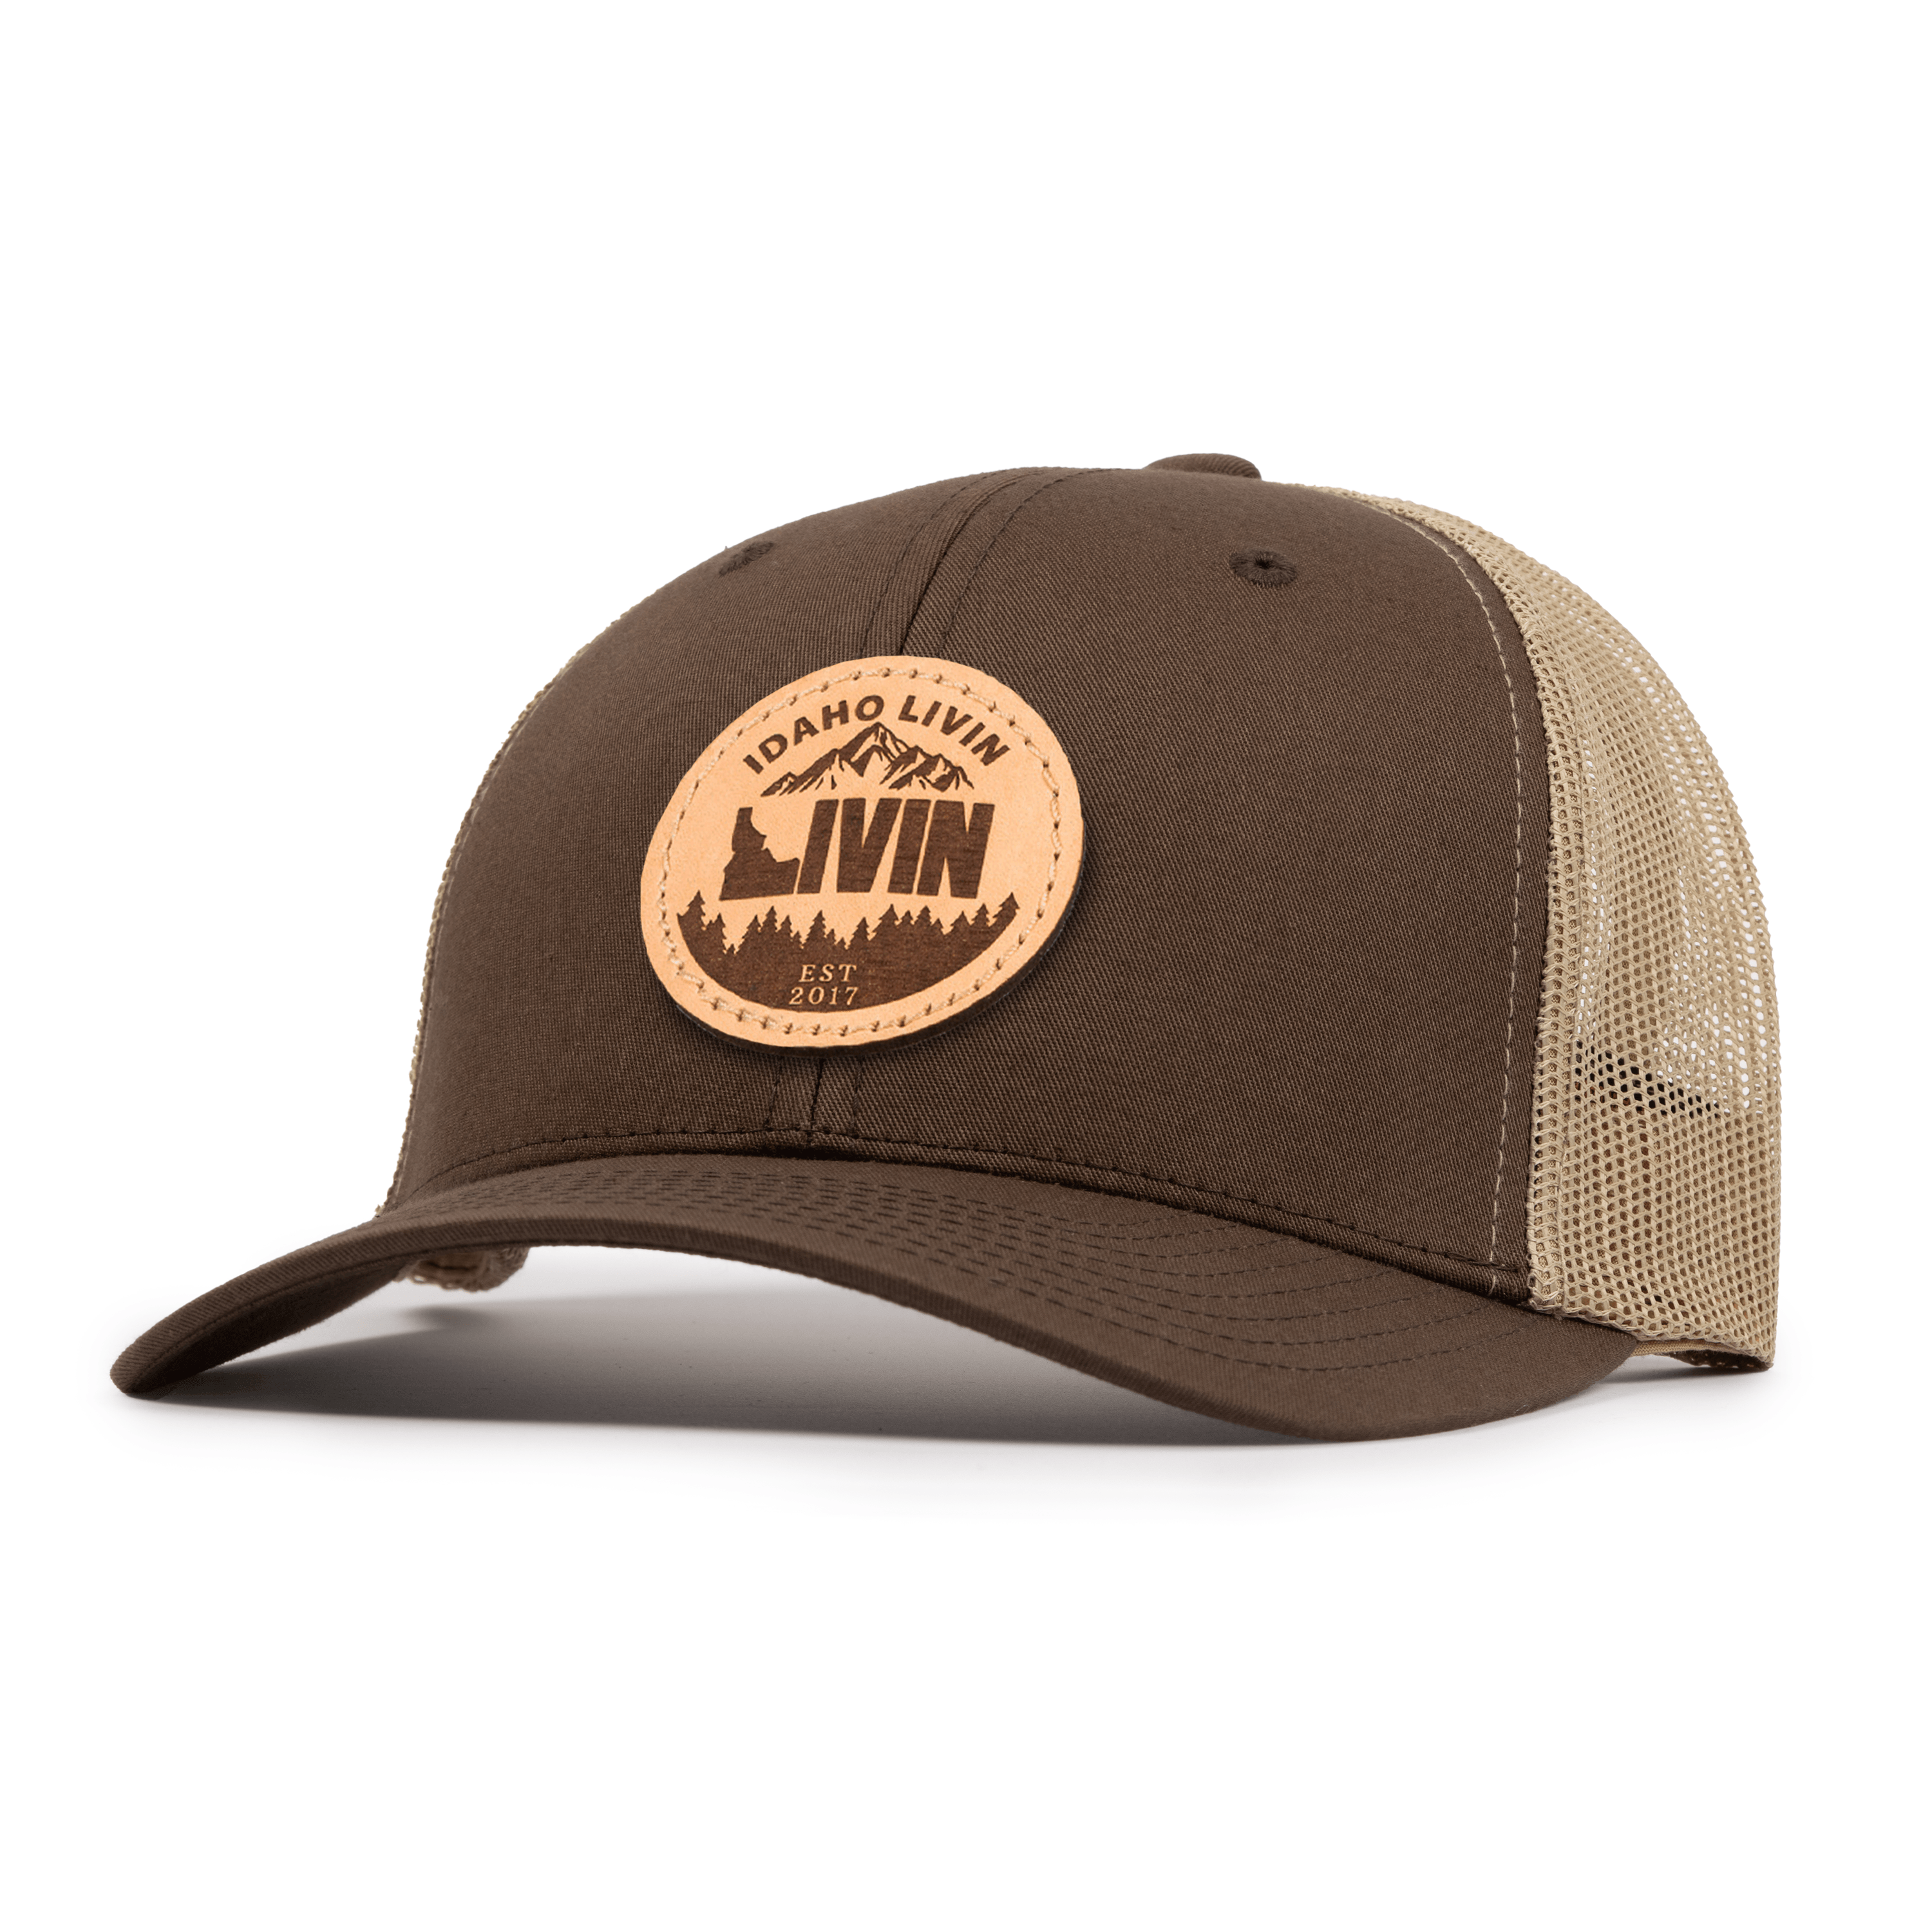 Circle Leather Patch Trucker Hat - Idaho Livin